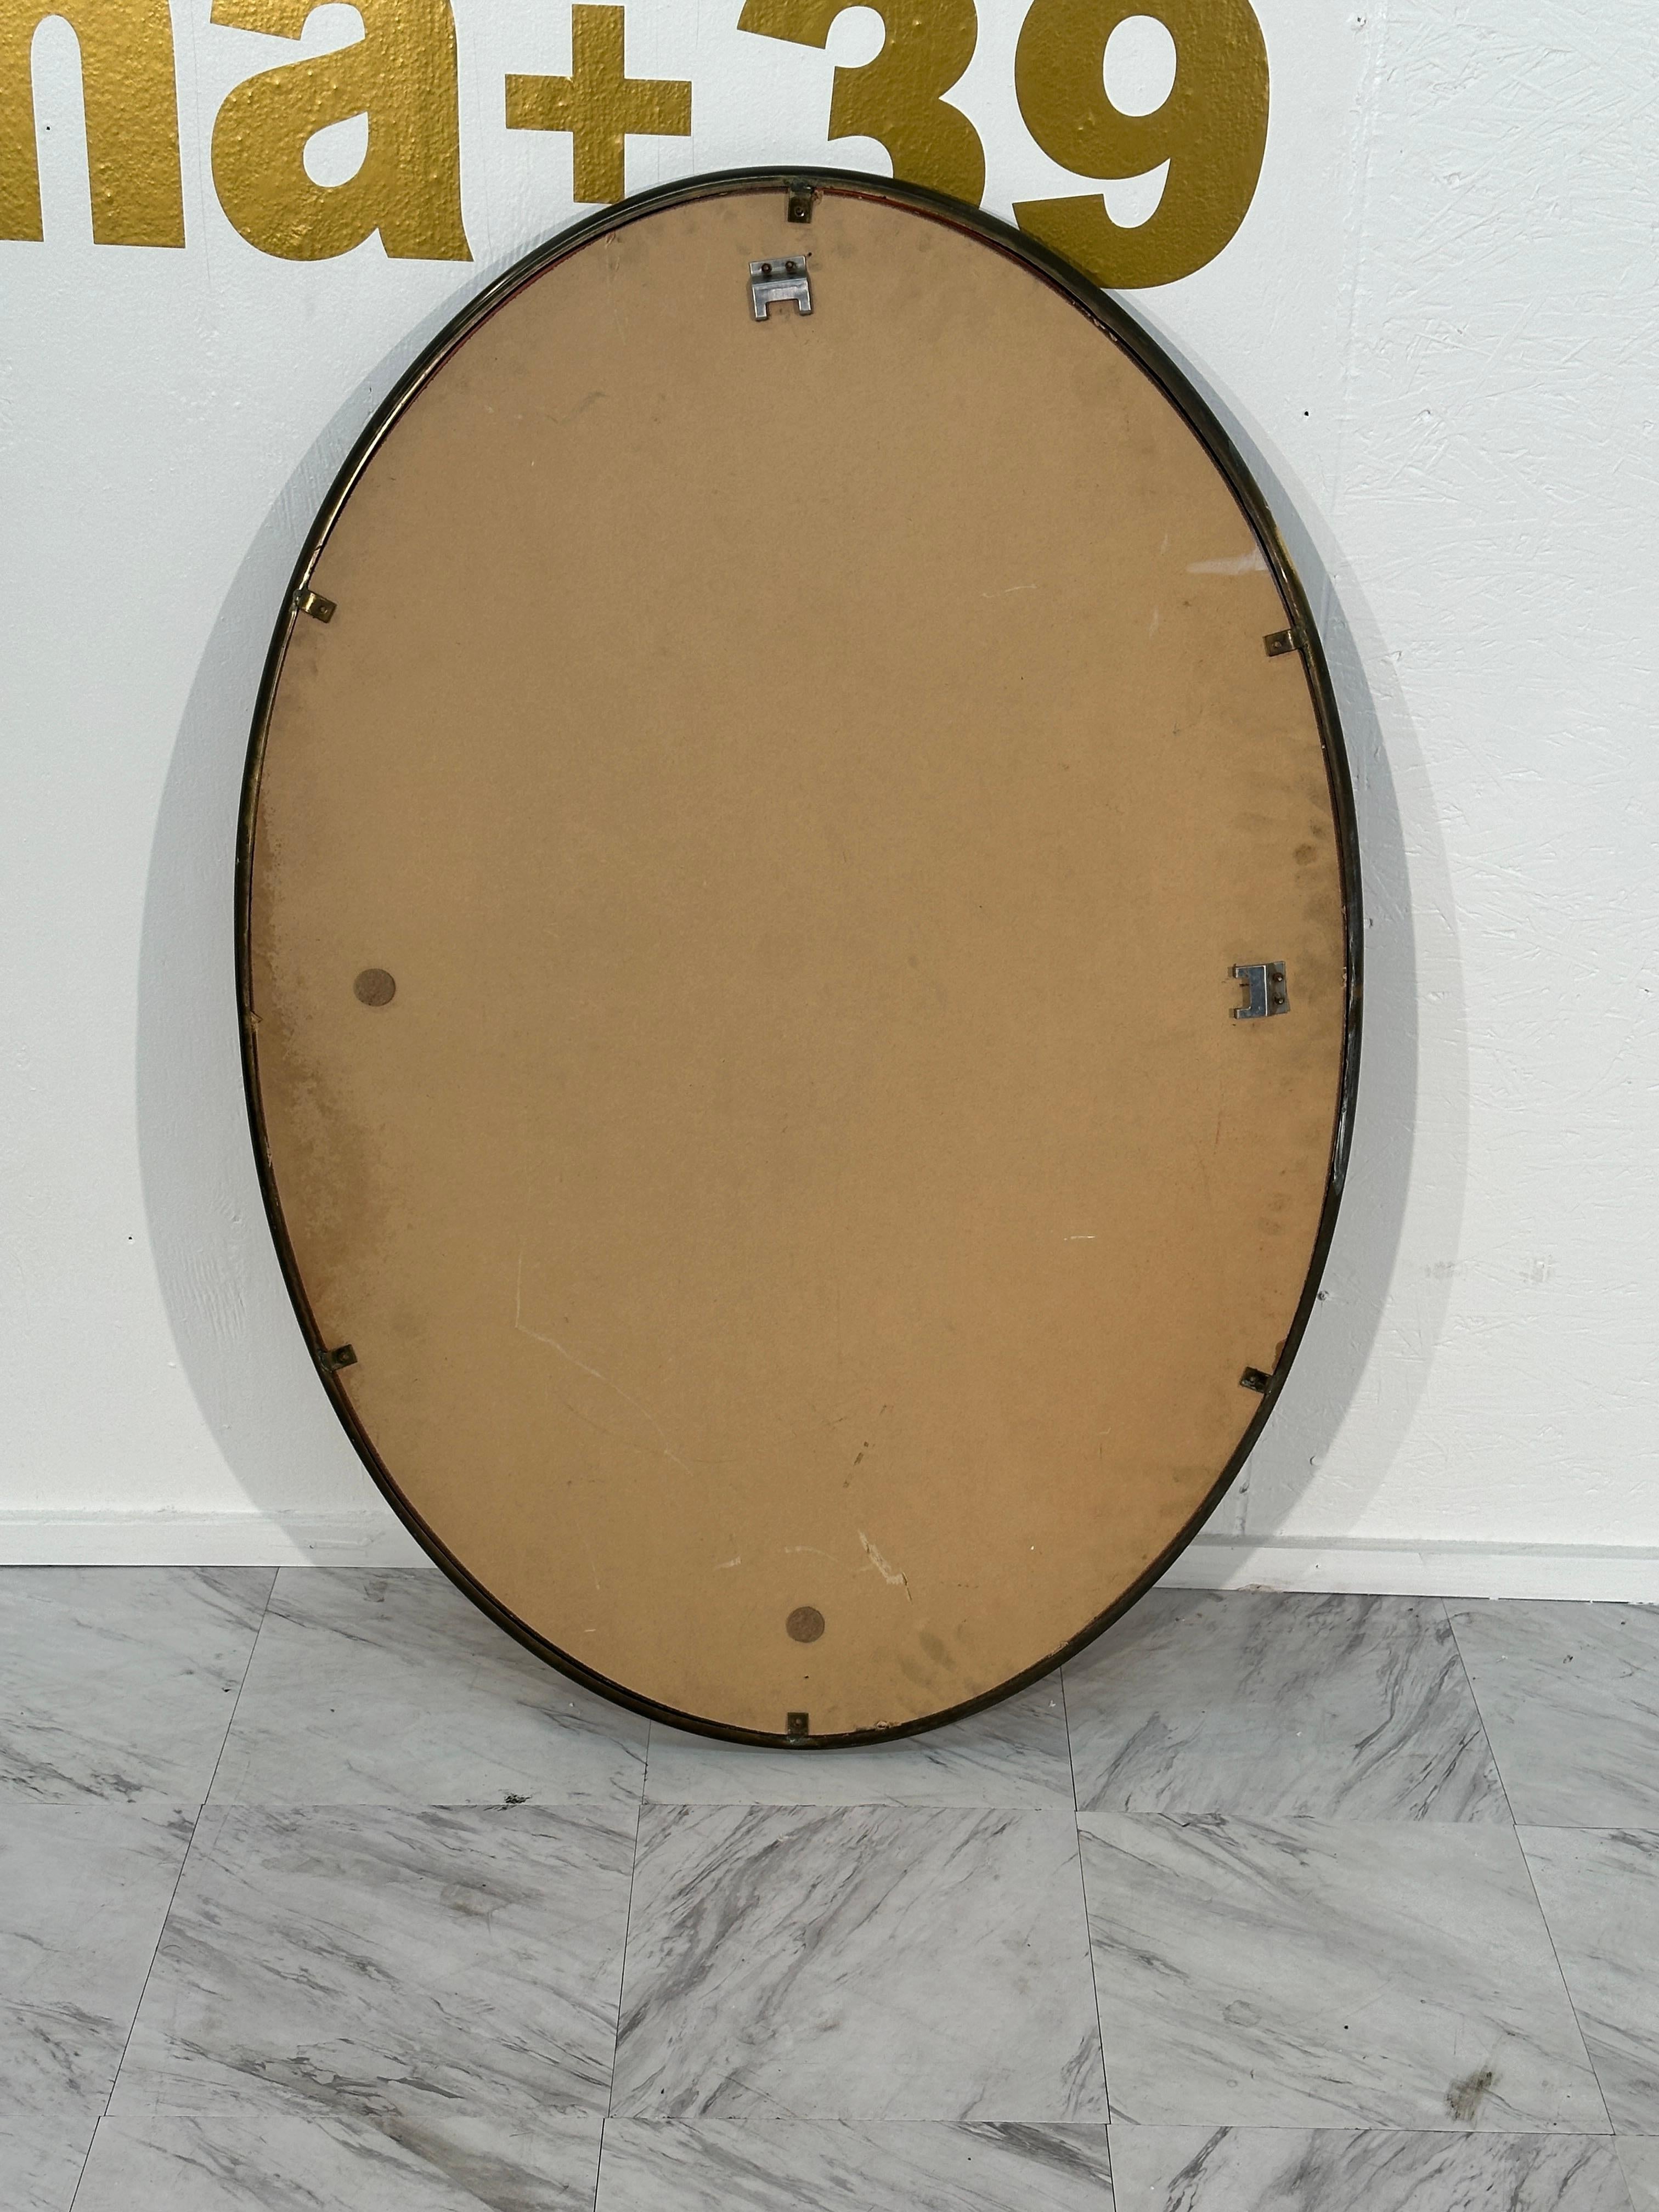 The Vintage Italian Oval Wood Wall Mirror with Smoked Glass from the 1980s is a sleek and sophisticated piece. Its oval shape and smoked glass infuse a touch of retro elegance into any space. Crafted with Italian finesse, this mirror combines